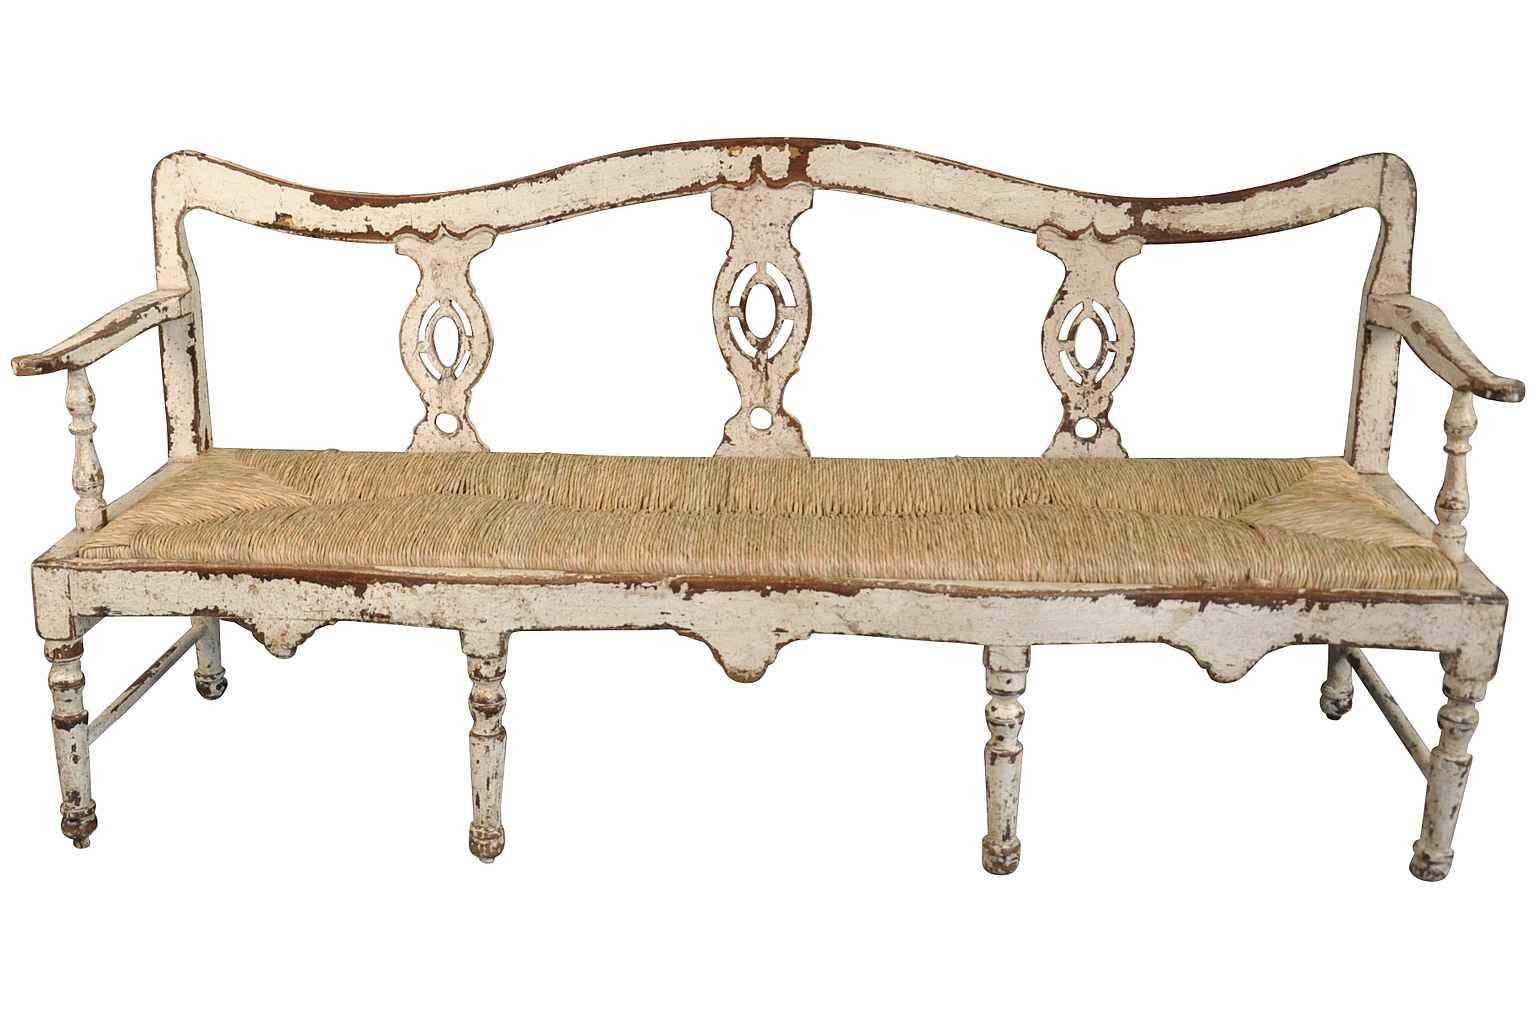 A charming 19th century banquette, bench from the Catalan region of Spain. Beautifully constructed in painted wood with rush seat.